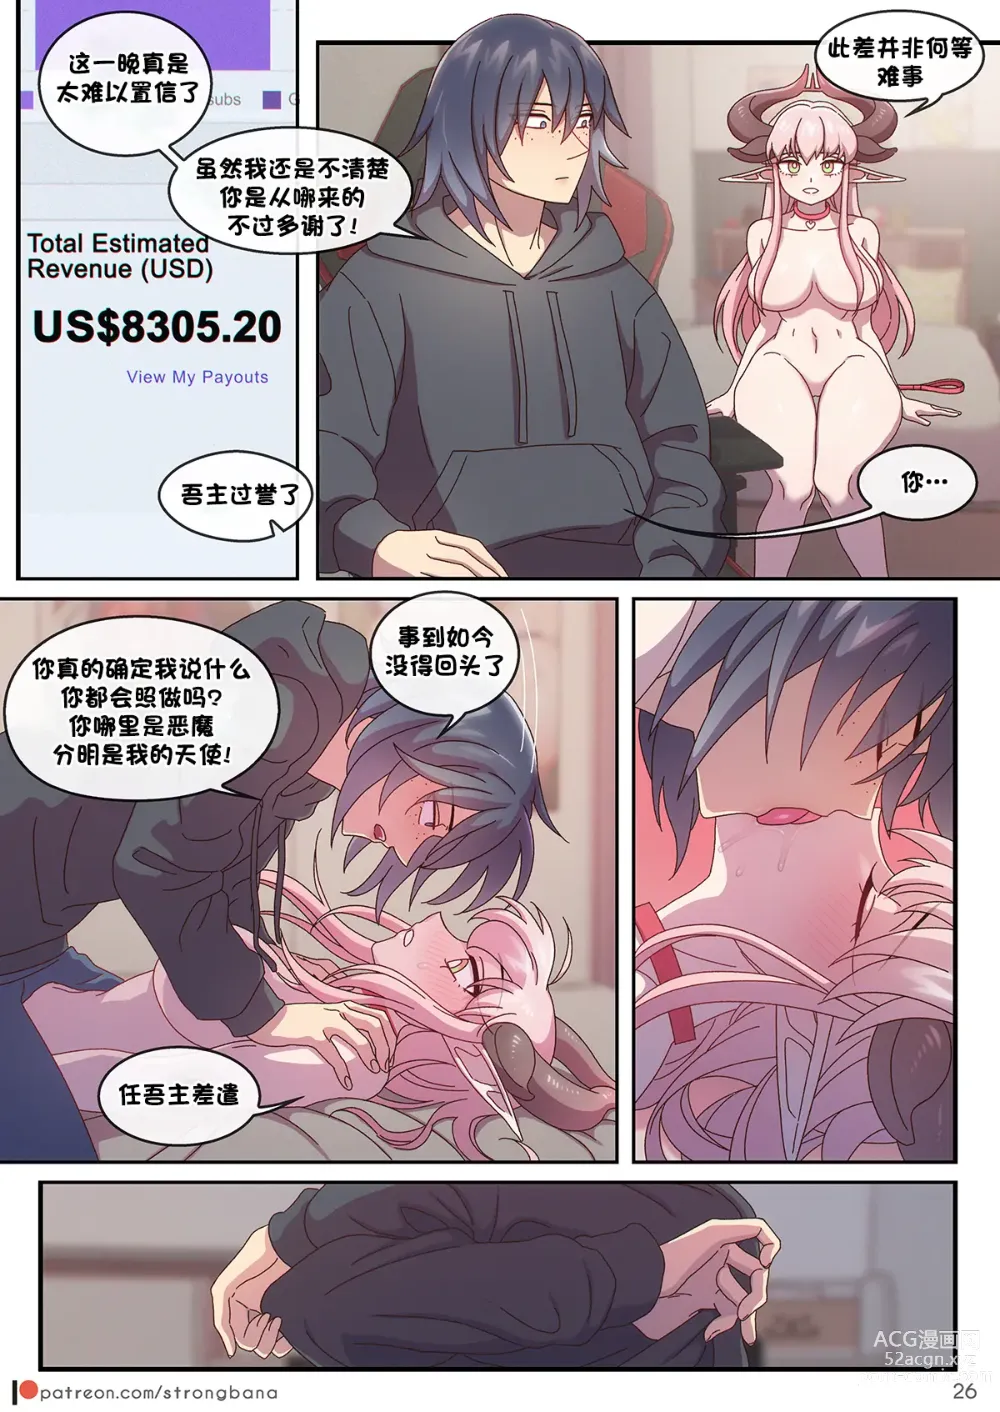 Page 28 of doujinshi JUST 666$